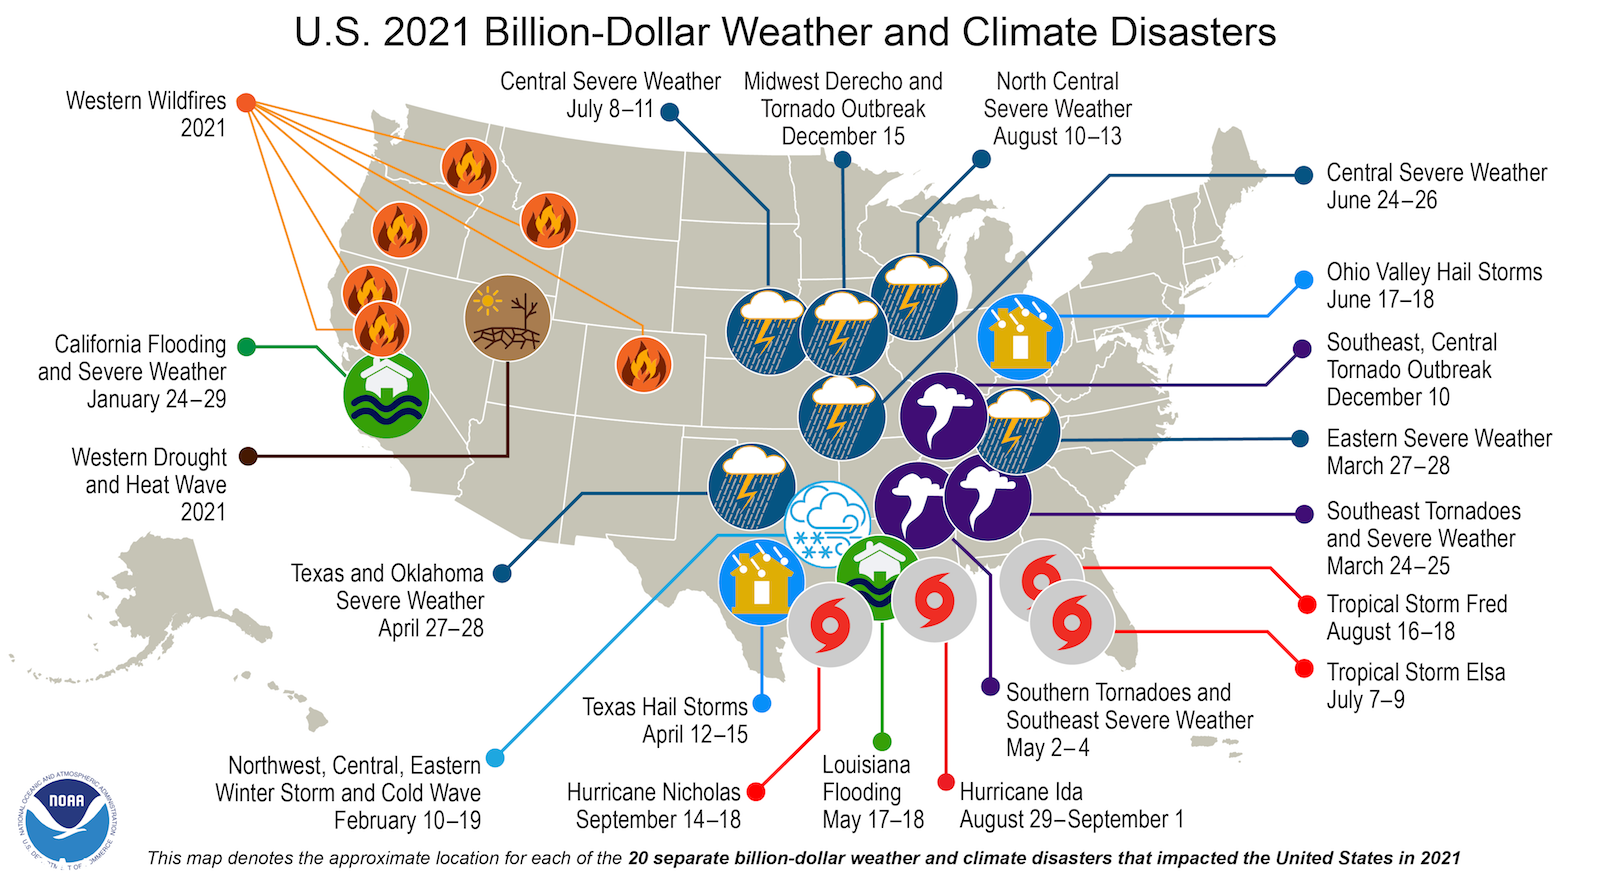 A map of the U.S. plotted with 20 separate billion-dollar disasters that occurred in 2021.